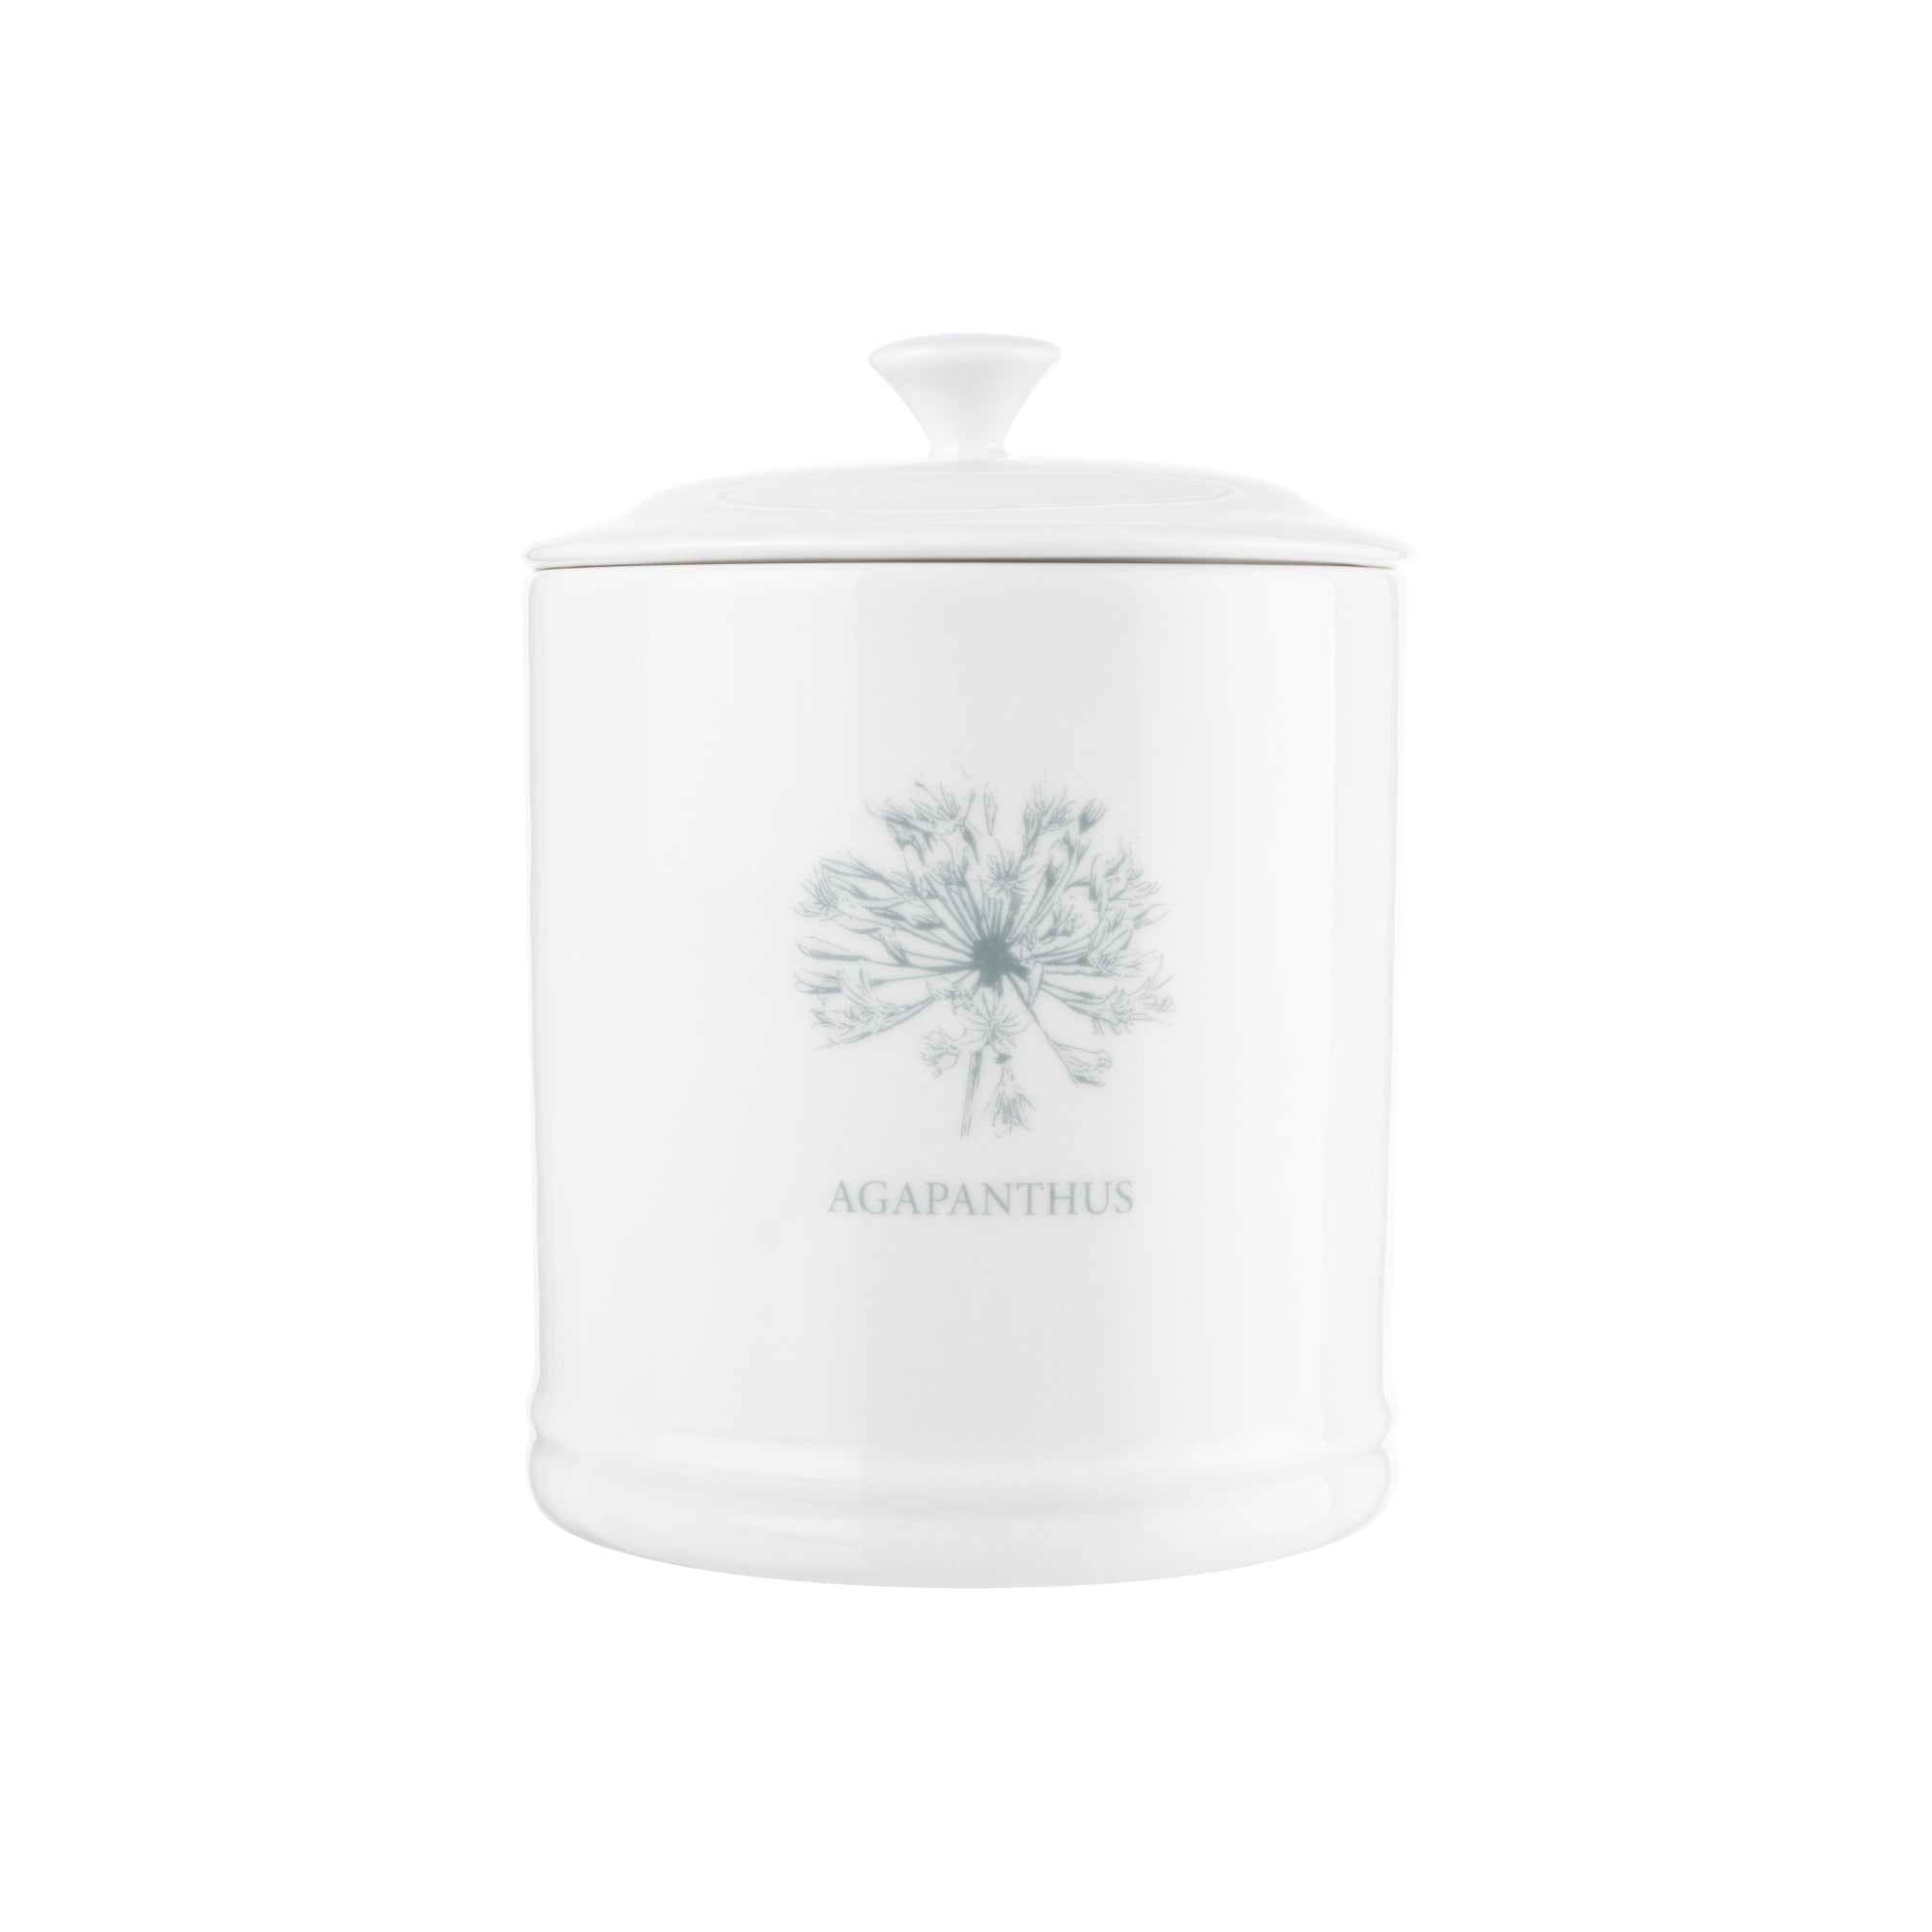 MARY BERRY ENGLISH GARDEN SUGAR CANISTER | AGAPANTHUS